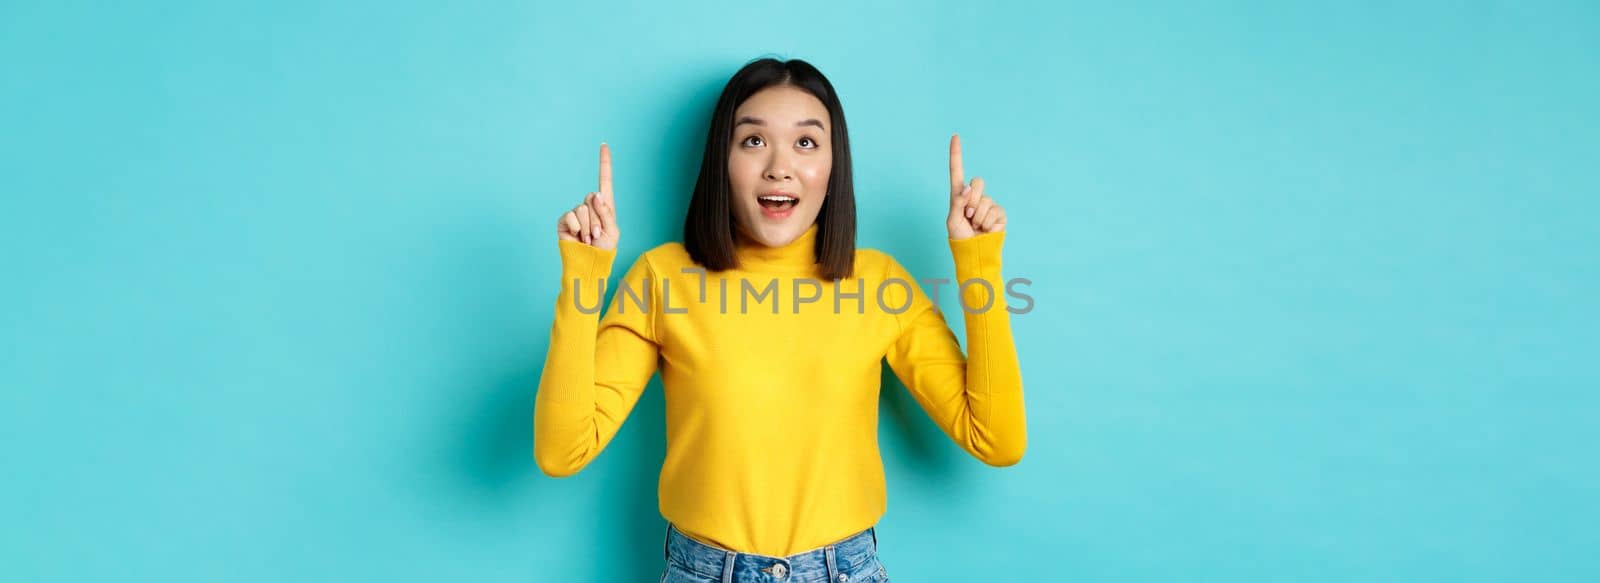 Shopping concept. Dreamy korean woman looking with desire at promo offer, pointing fingers up and staring at advertisement amazed, standing over blue background.